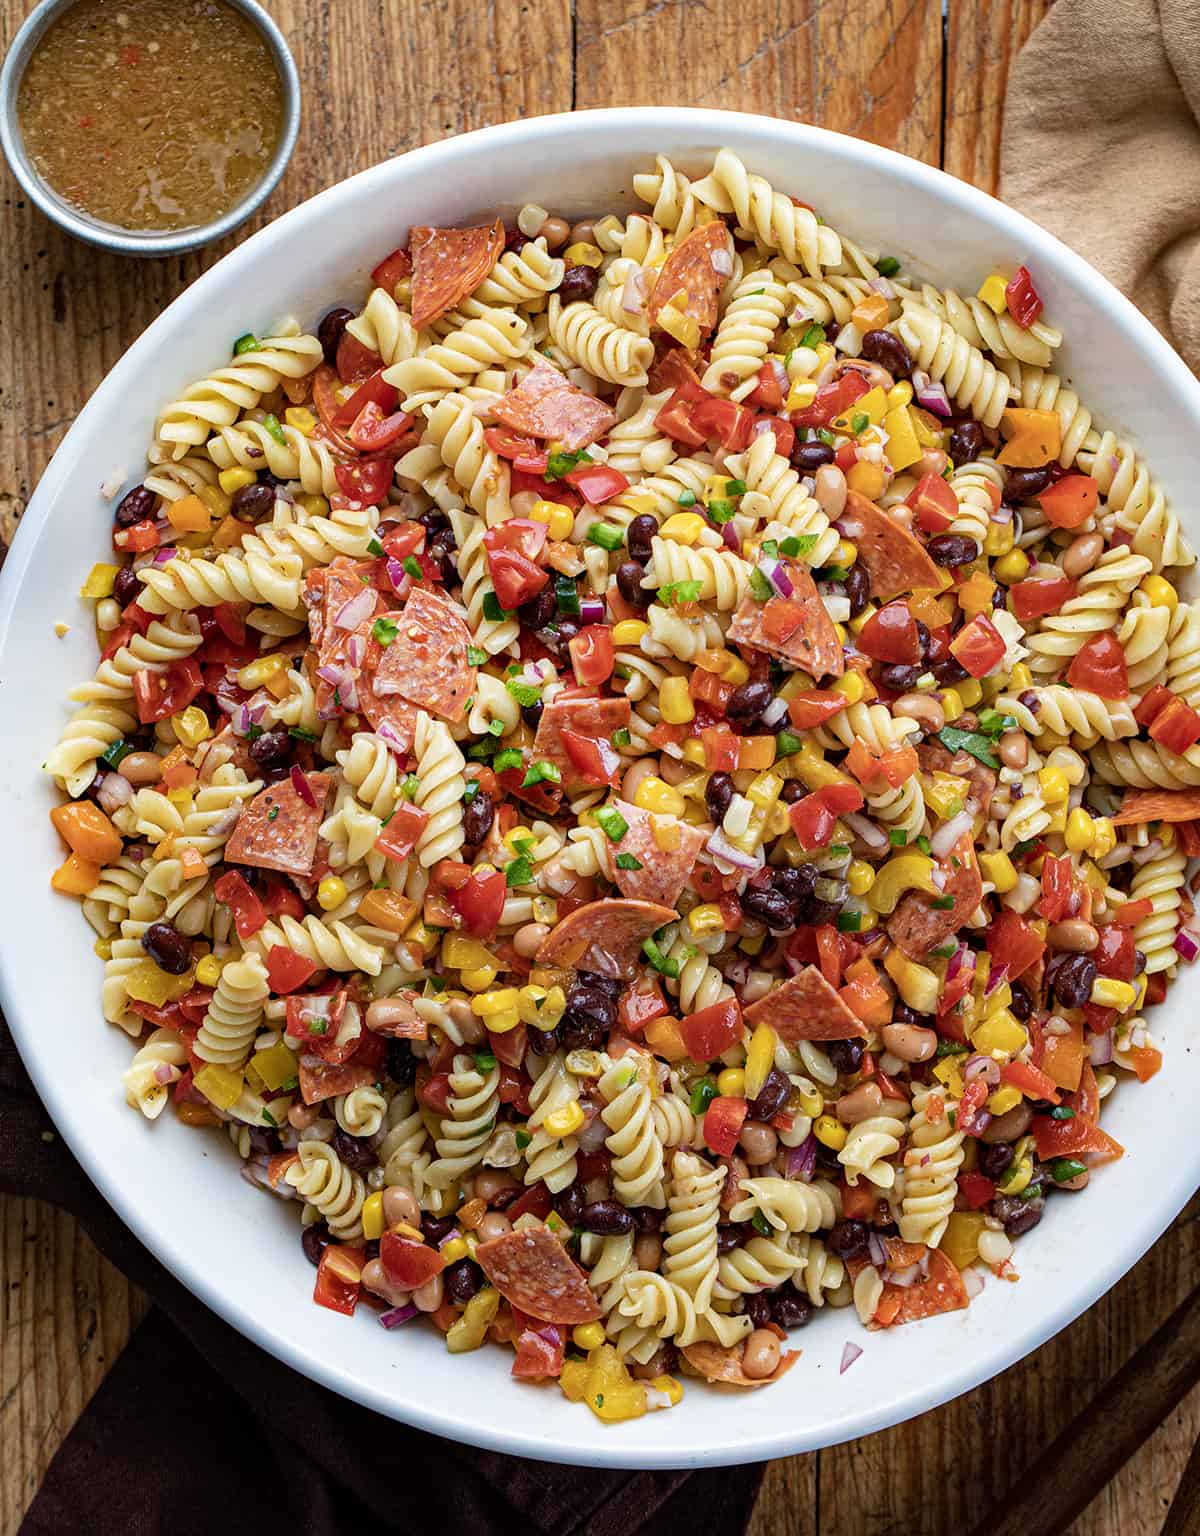 Bowl of Cowboy Caviar Pasta Salad in a White Bowl on a Wooden Cutting Board.